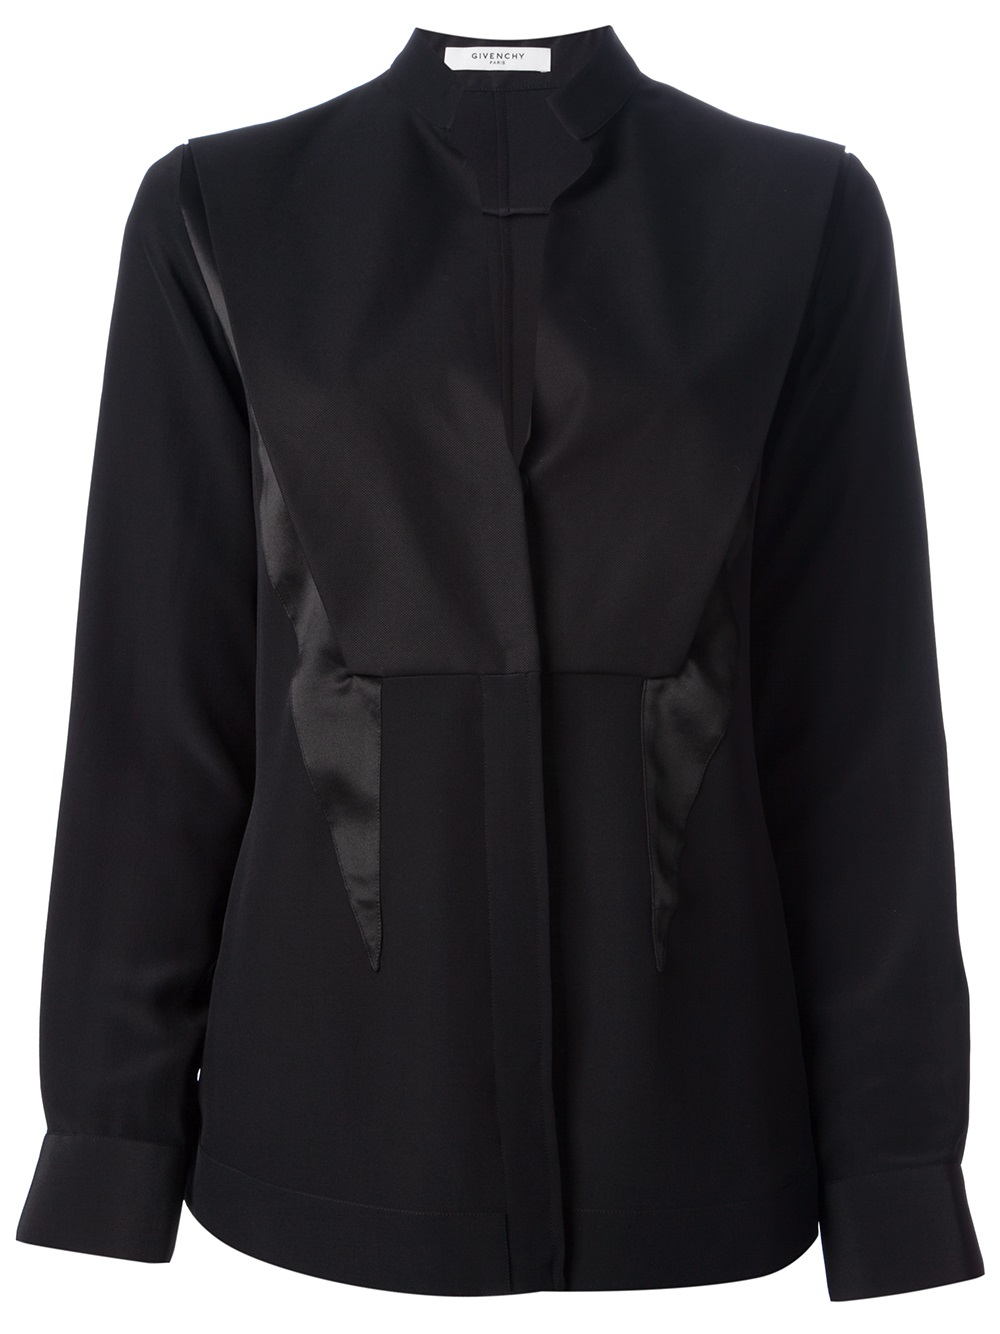 Givenchy Stand Up Collar Blazer in Black | Lyst